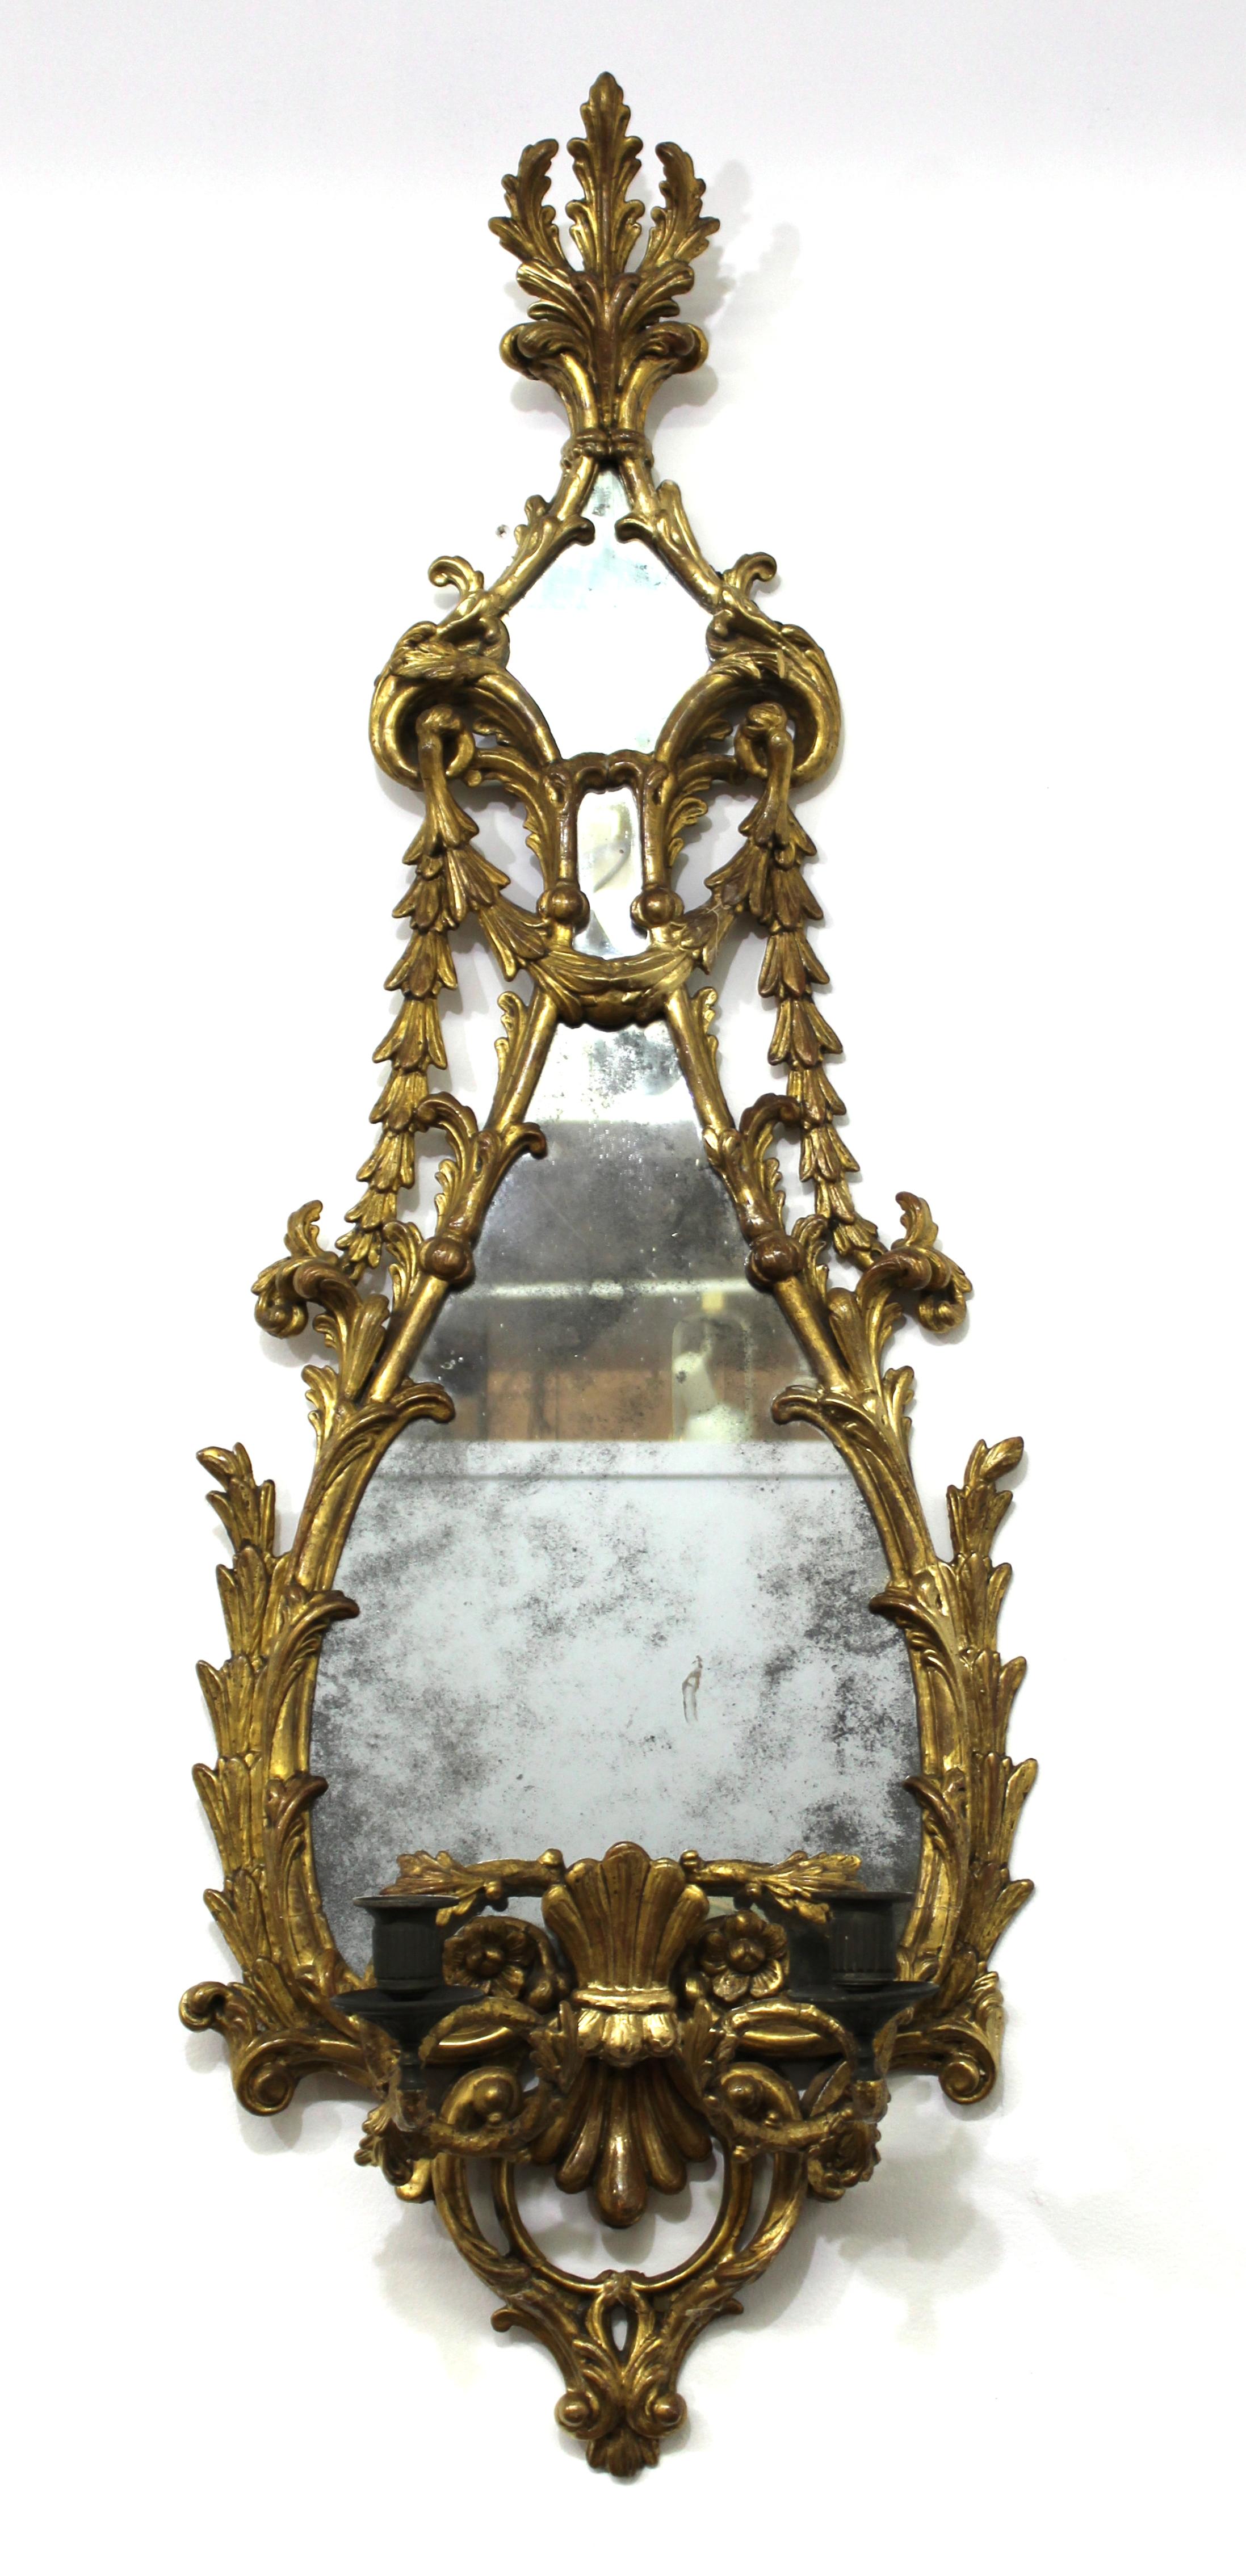 English Rococo George III style pair of carved giltwood mirrored girandole candle sconces with elaborate foliage and acanthus leaves. Two candle sockets on each sconce. In great antique condition with age-appropriate wear and use.